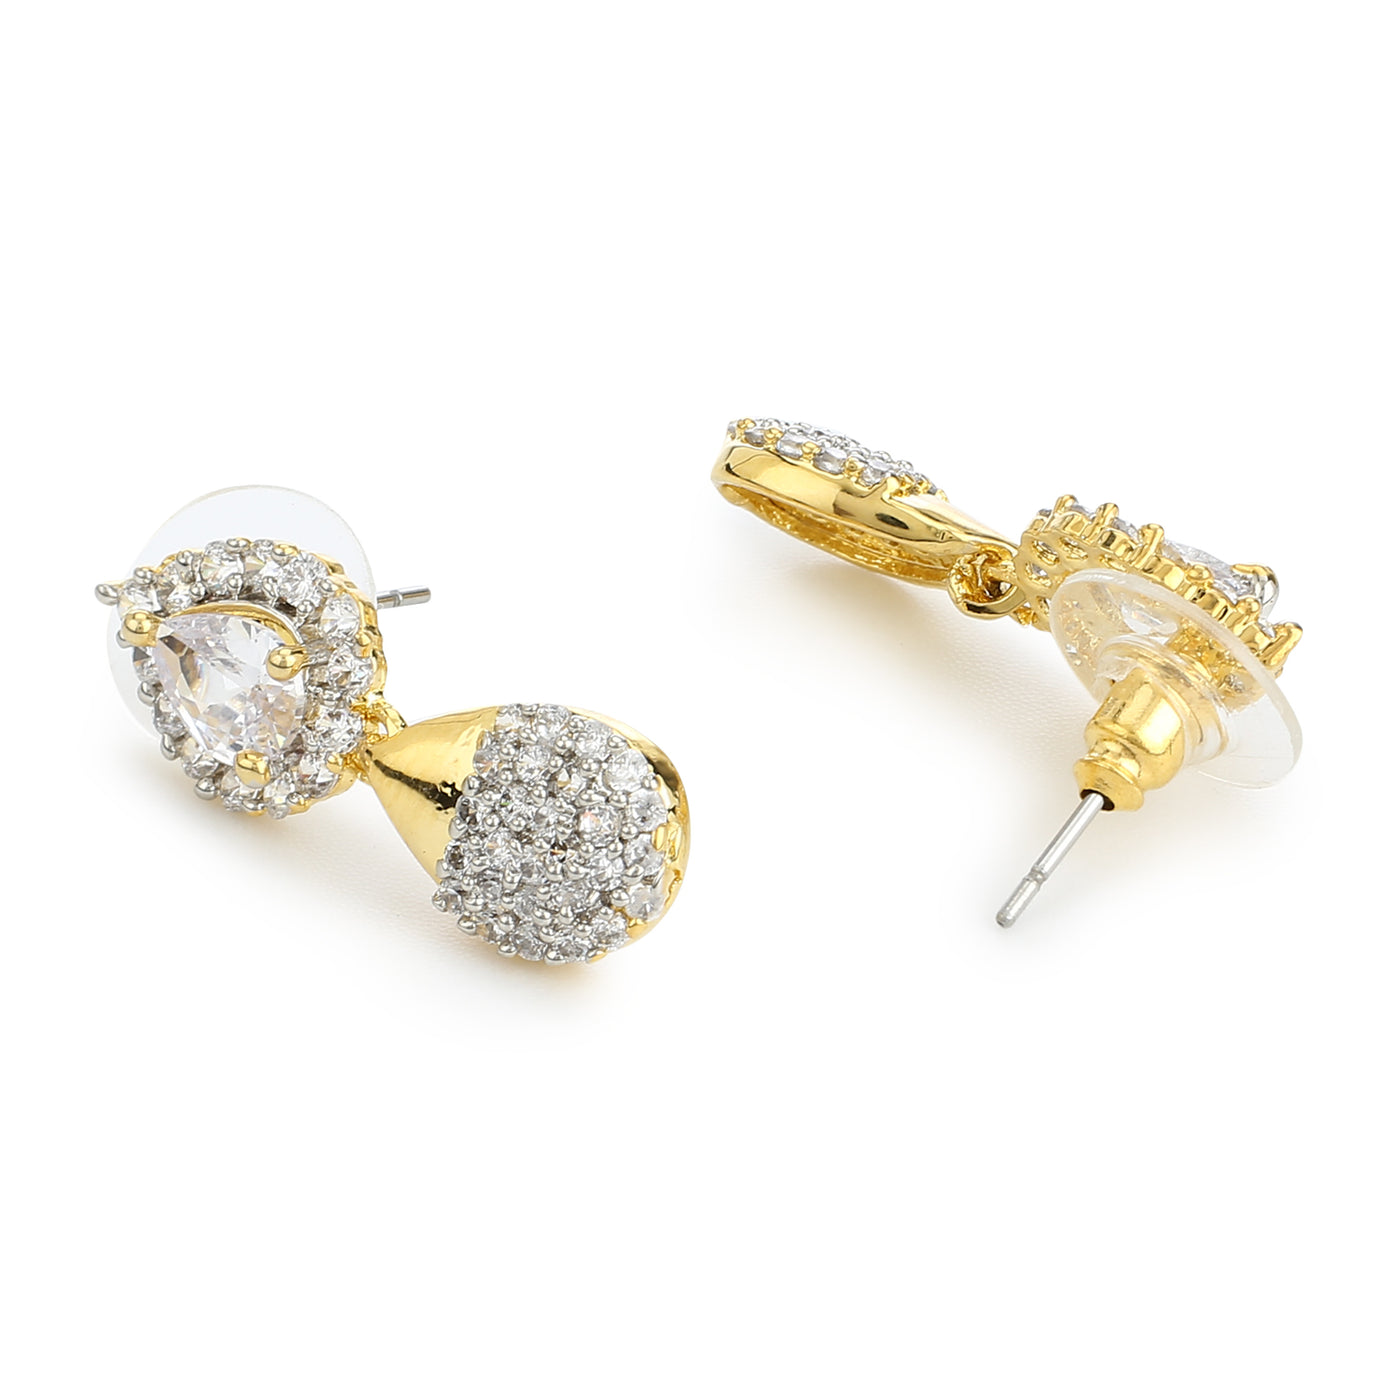 Estele Gold Plated CZ Elegant Drop Earrings With White Stones for Women